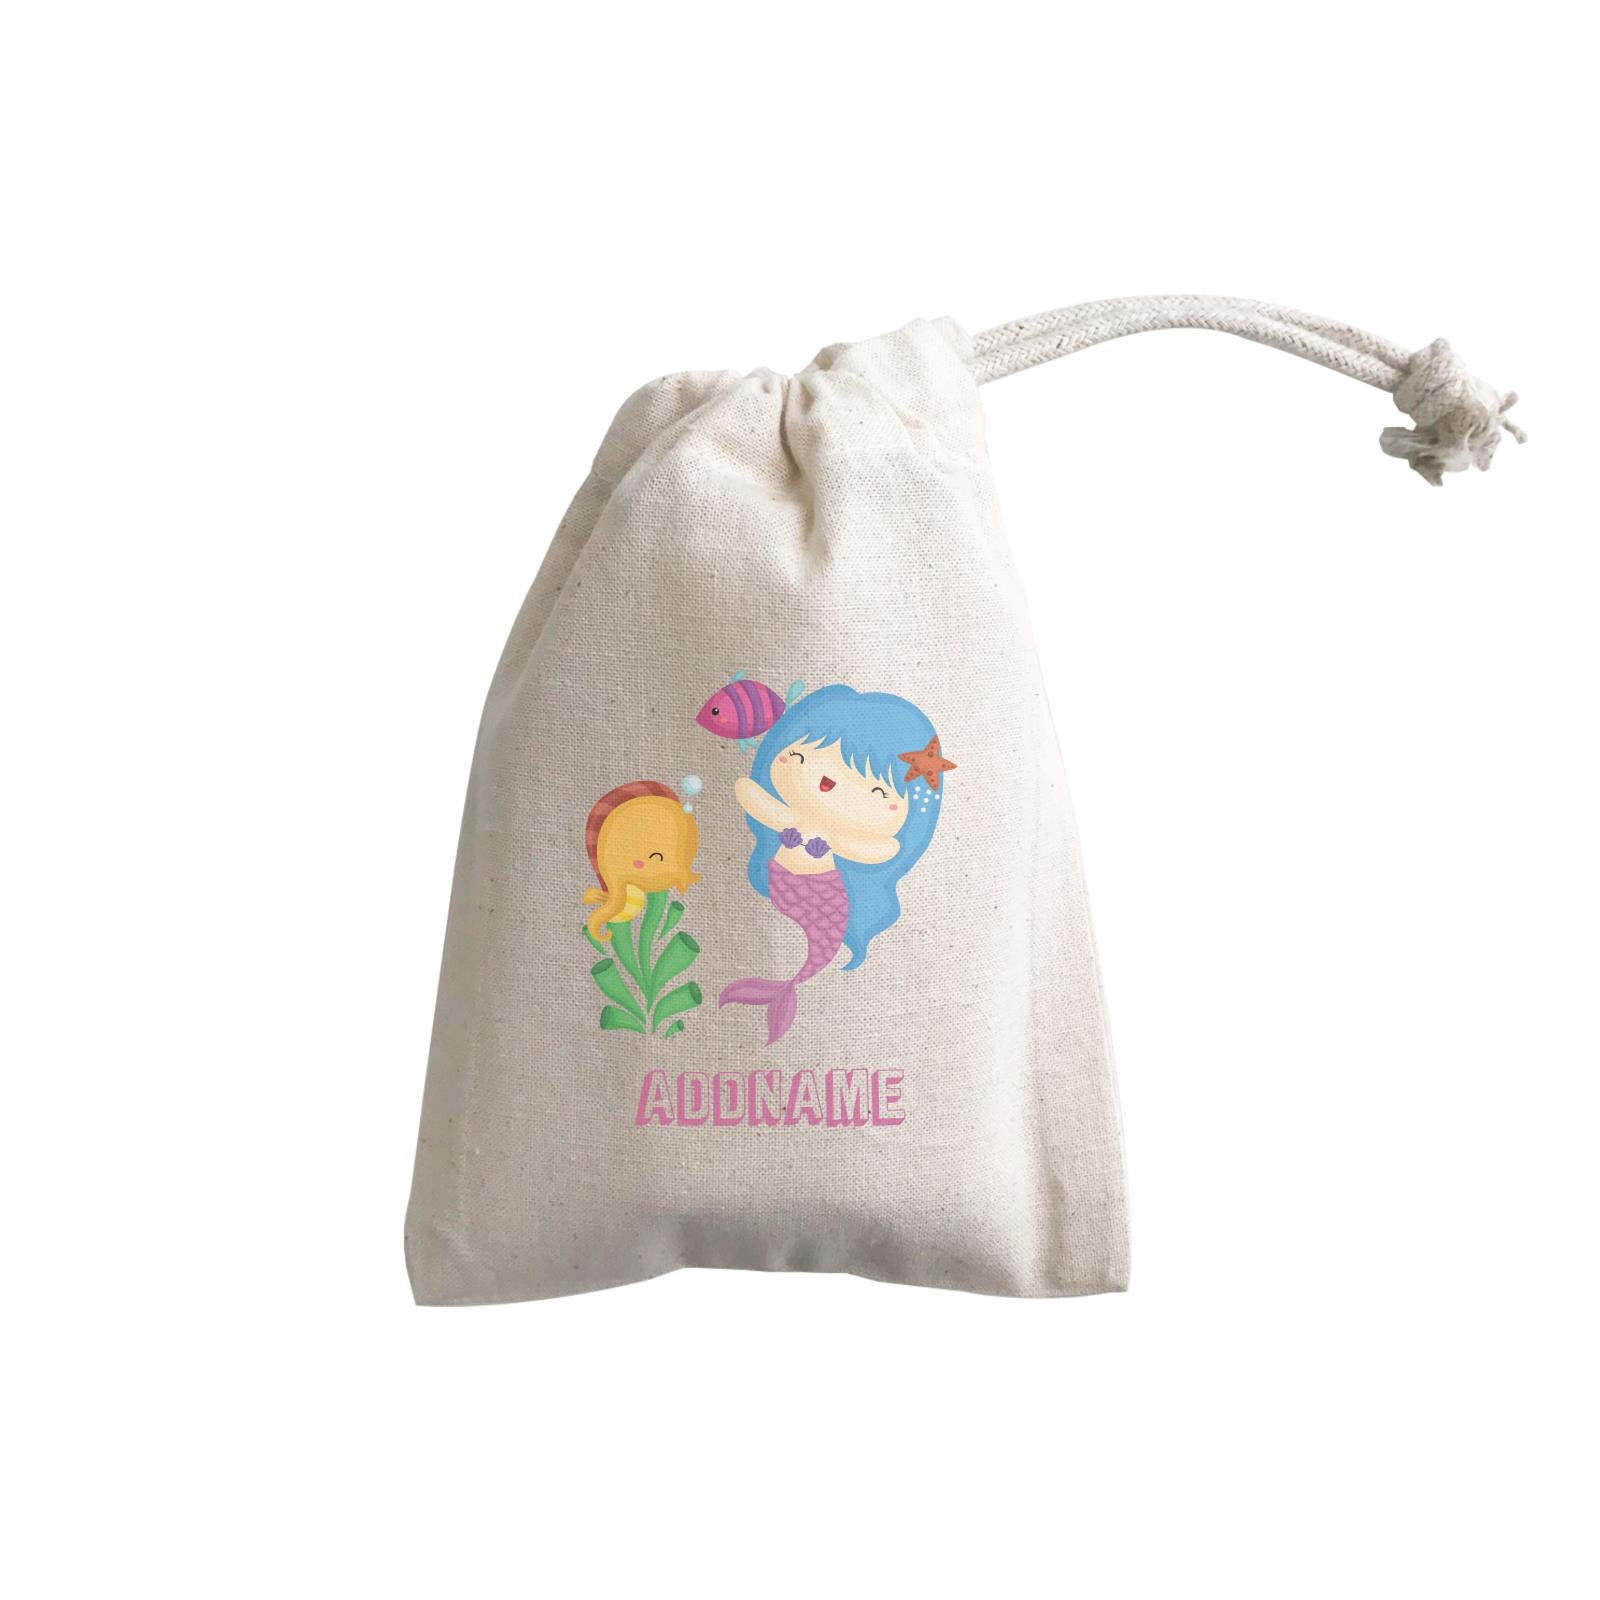 Birthday Mermaid Blue Hair Mermaid Playing With Seahorse Addname GP Gift Pouch